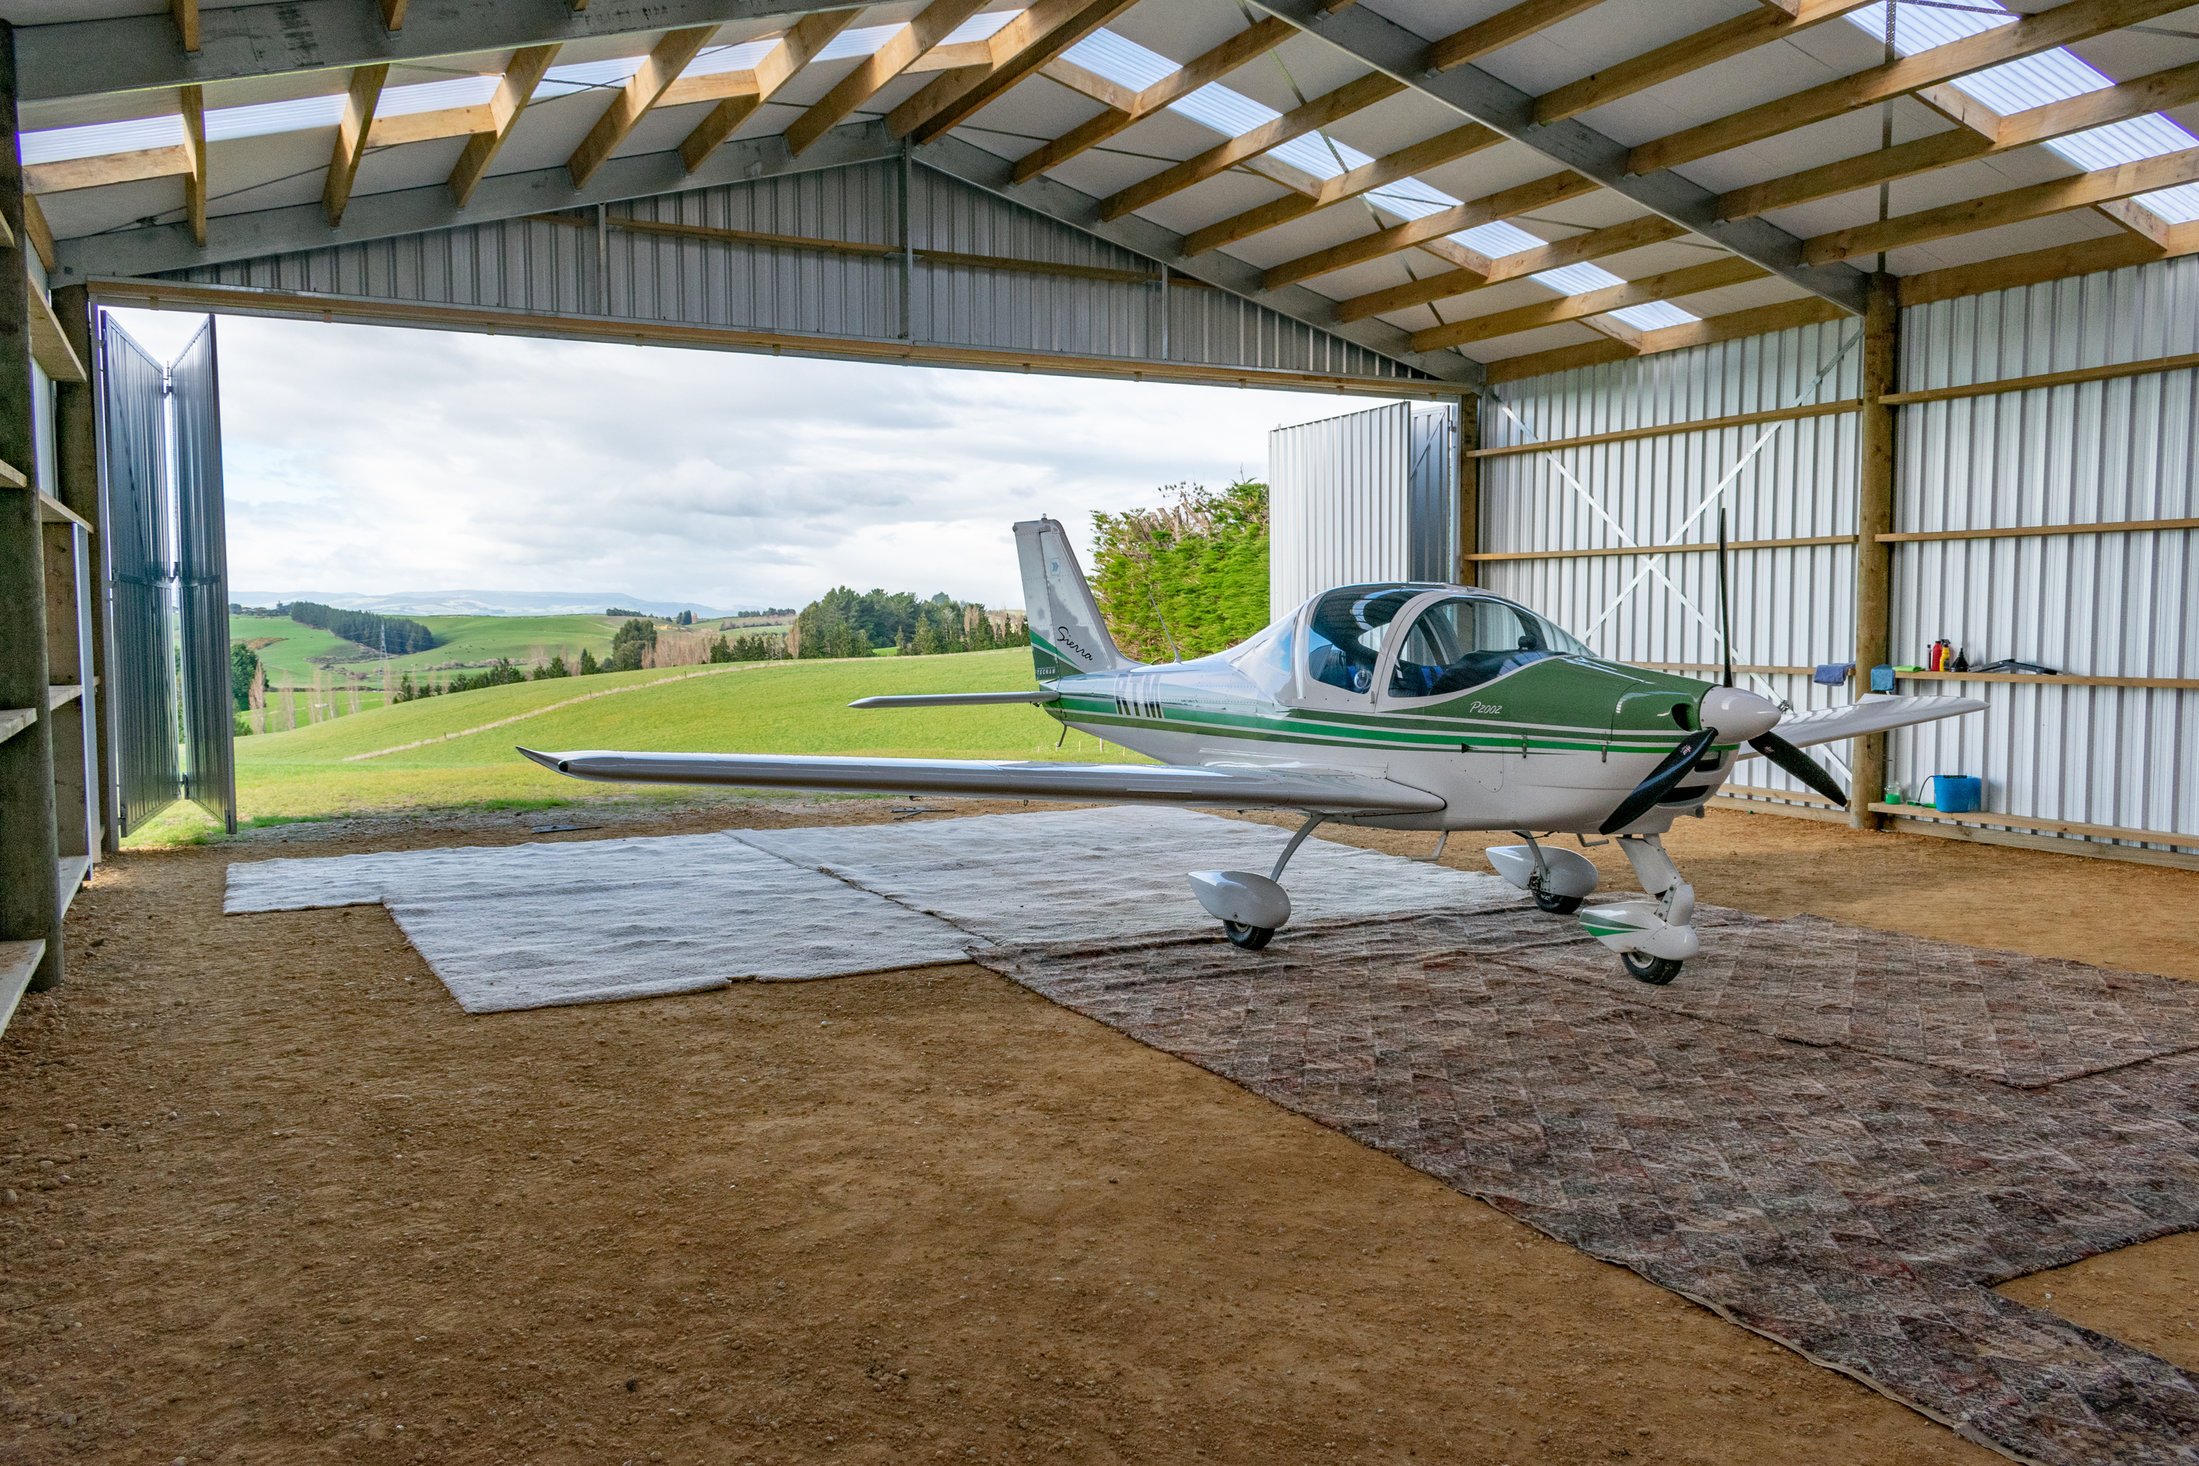 The incredibly spacious hangars make access and exiting the shed in your aircraft simple